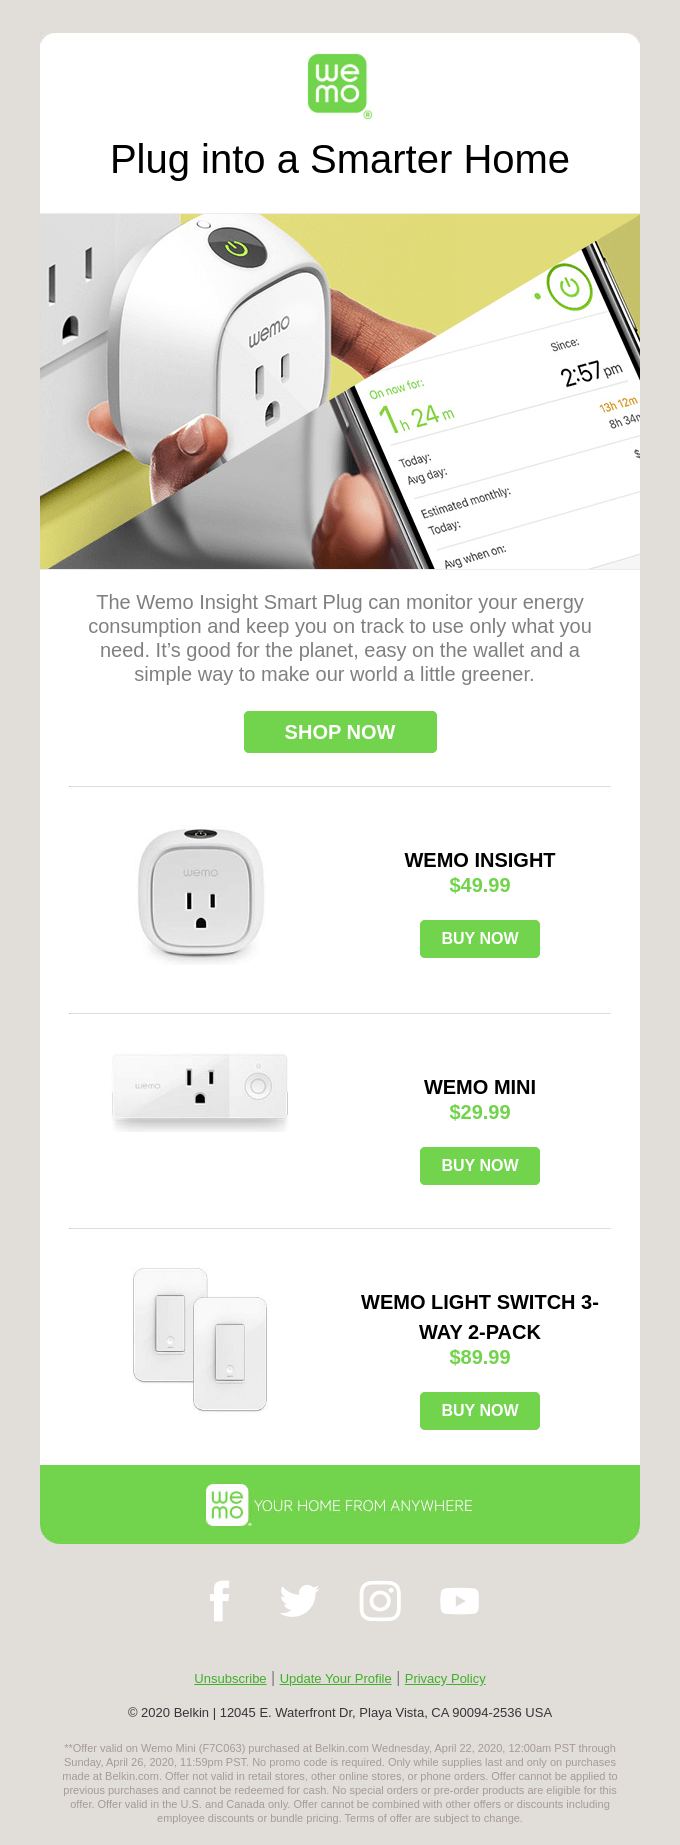 Live a Little Greener with Wemo